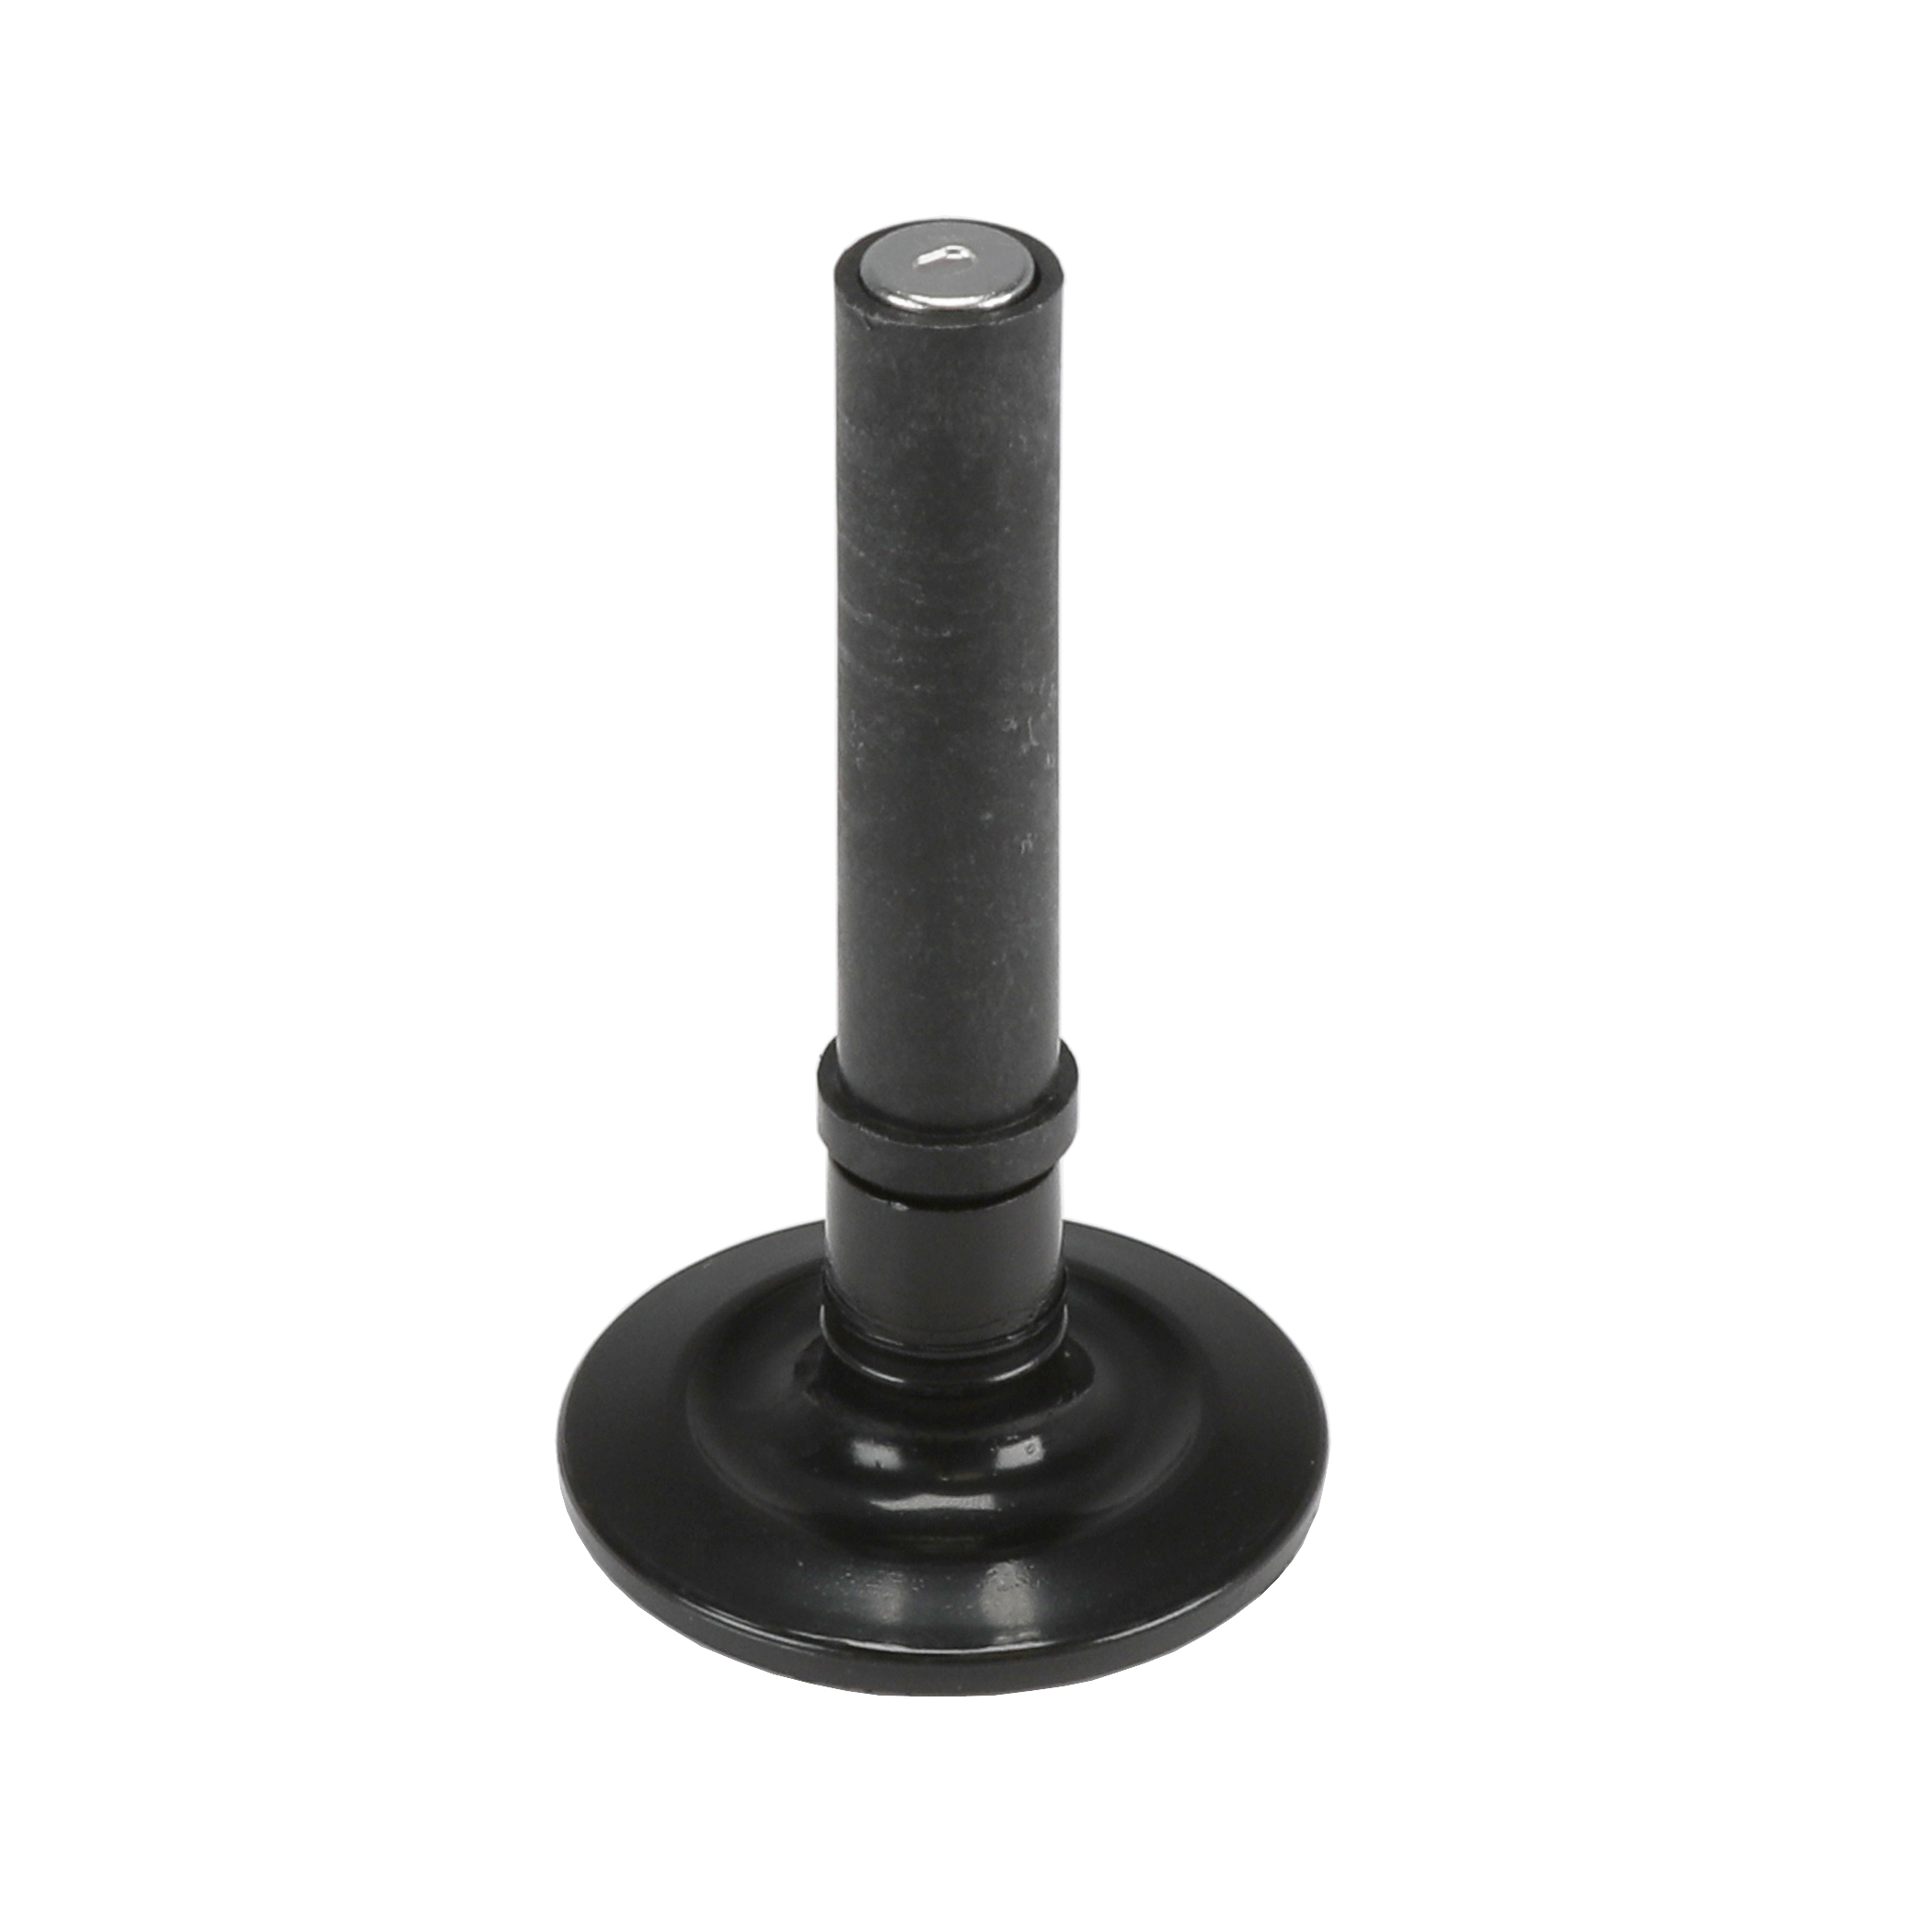 A-19-AU Urinal Relief Valve in Black for Sloan